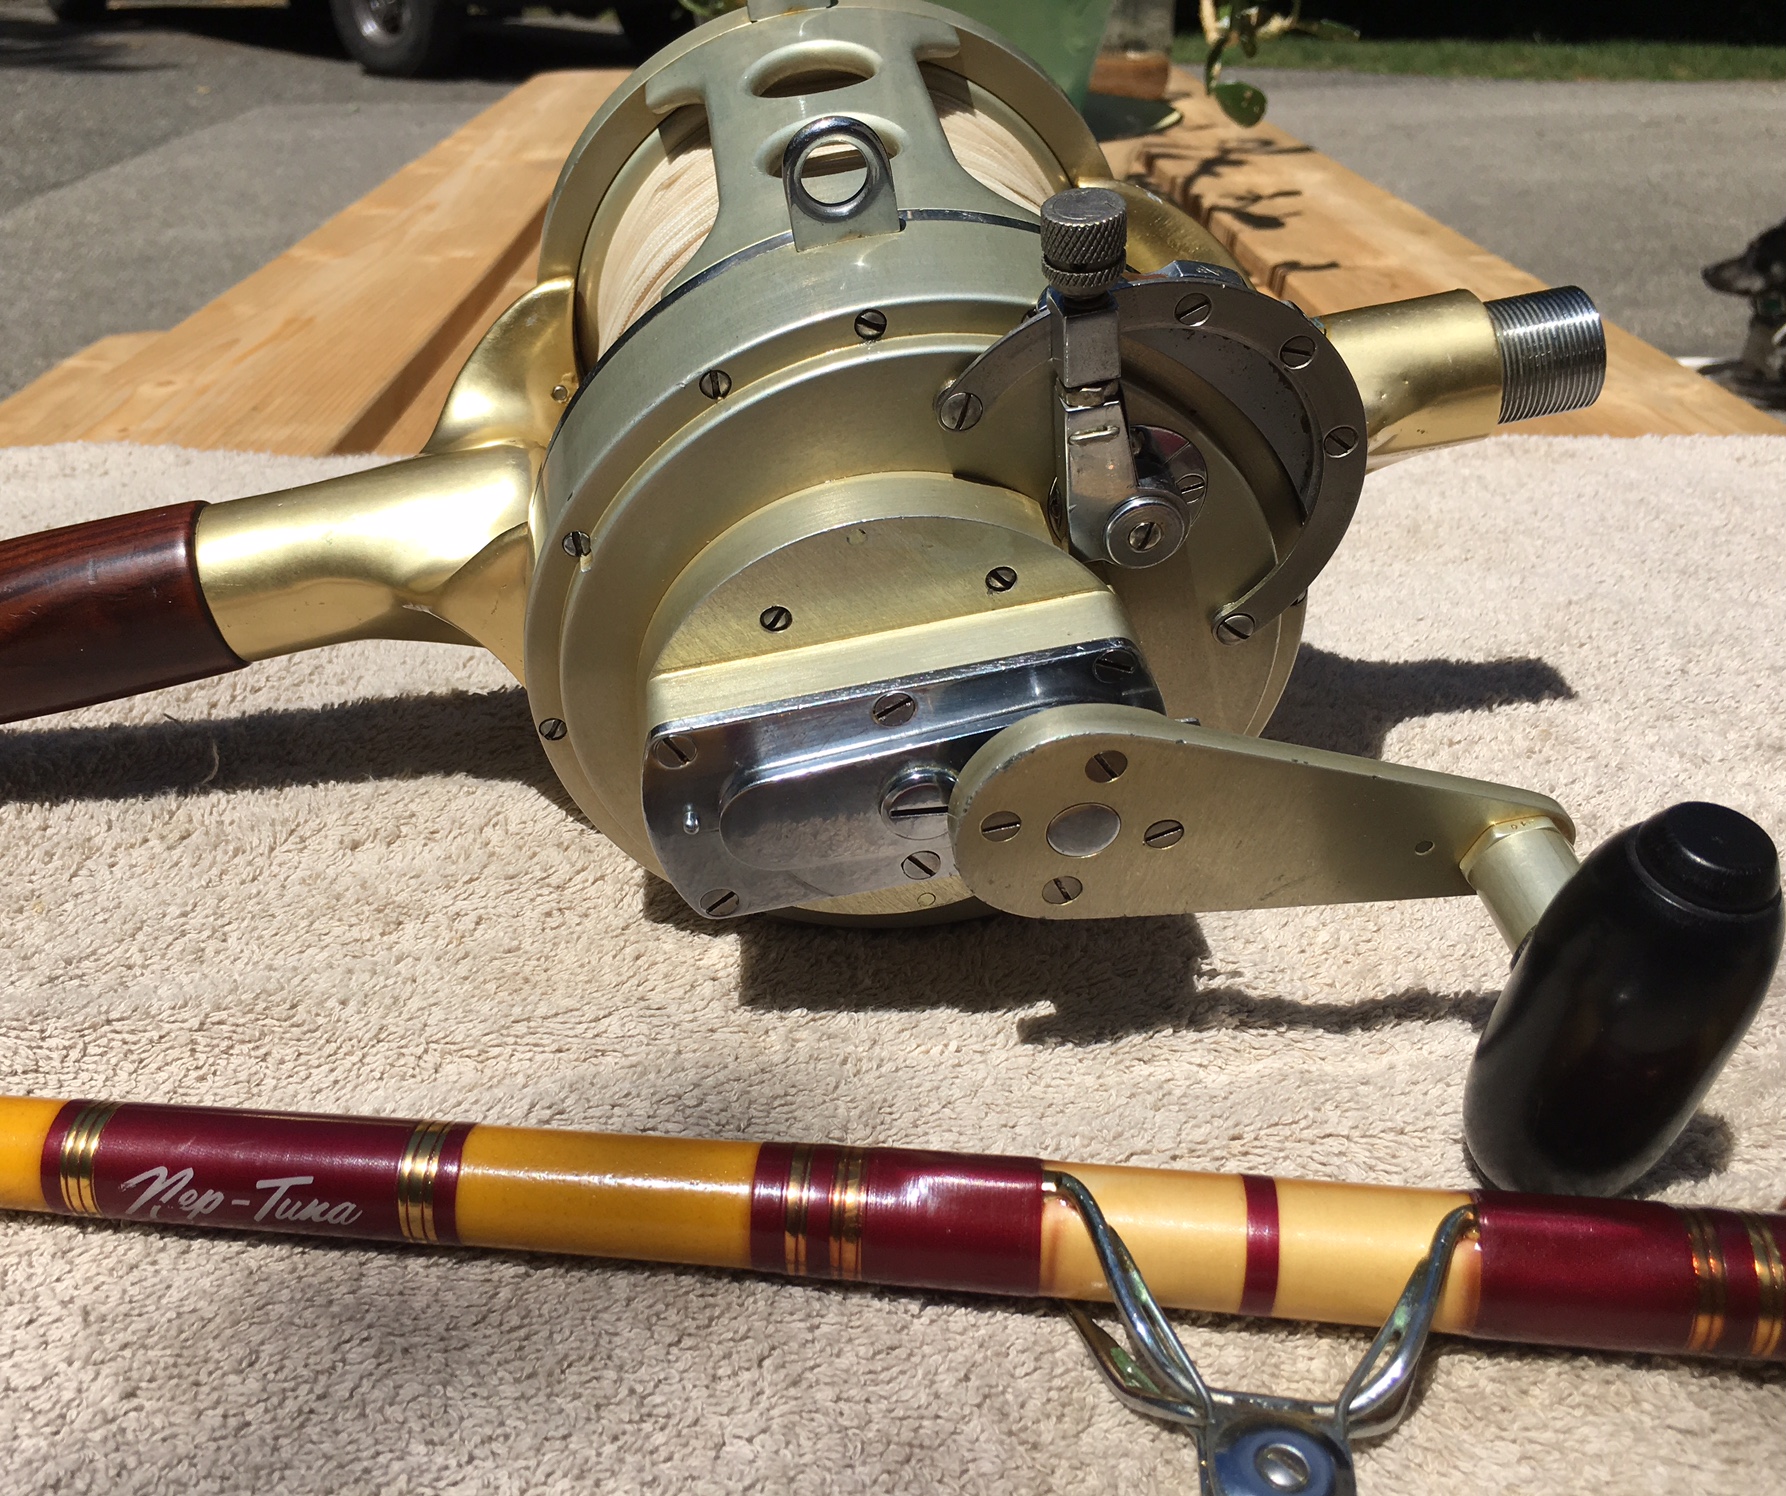 12/0 Fin-Nor Machine Industries reel in a Nep-Tuna cradle with 130 lb rod -  Reel Talk - ORCA